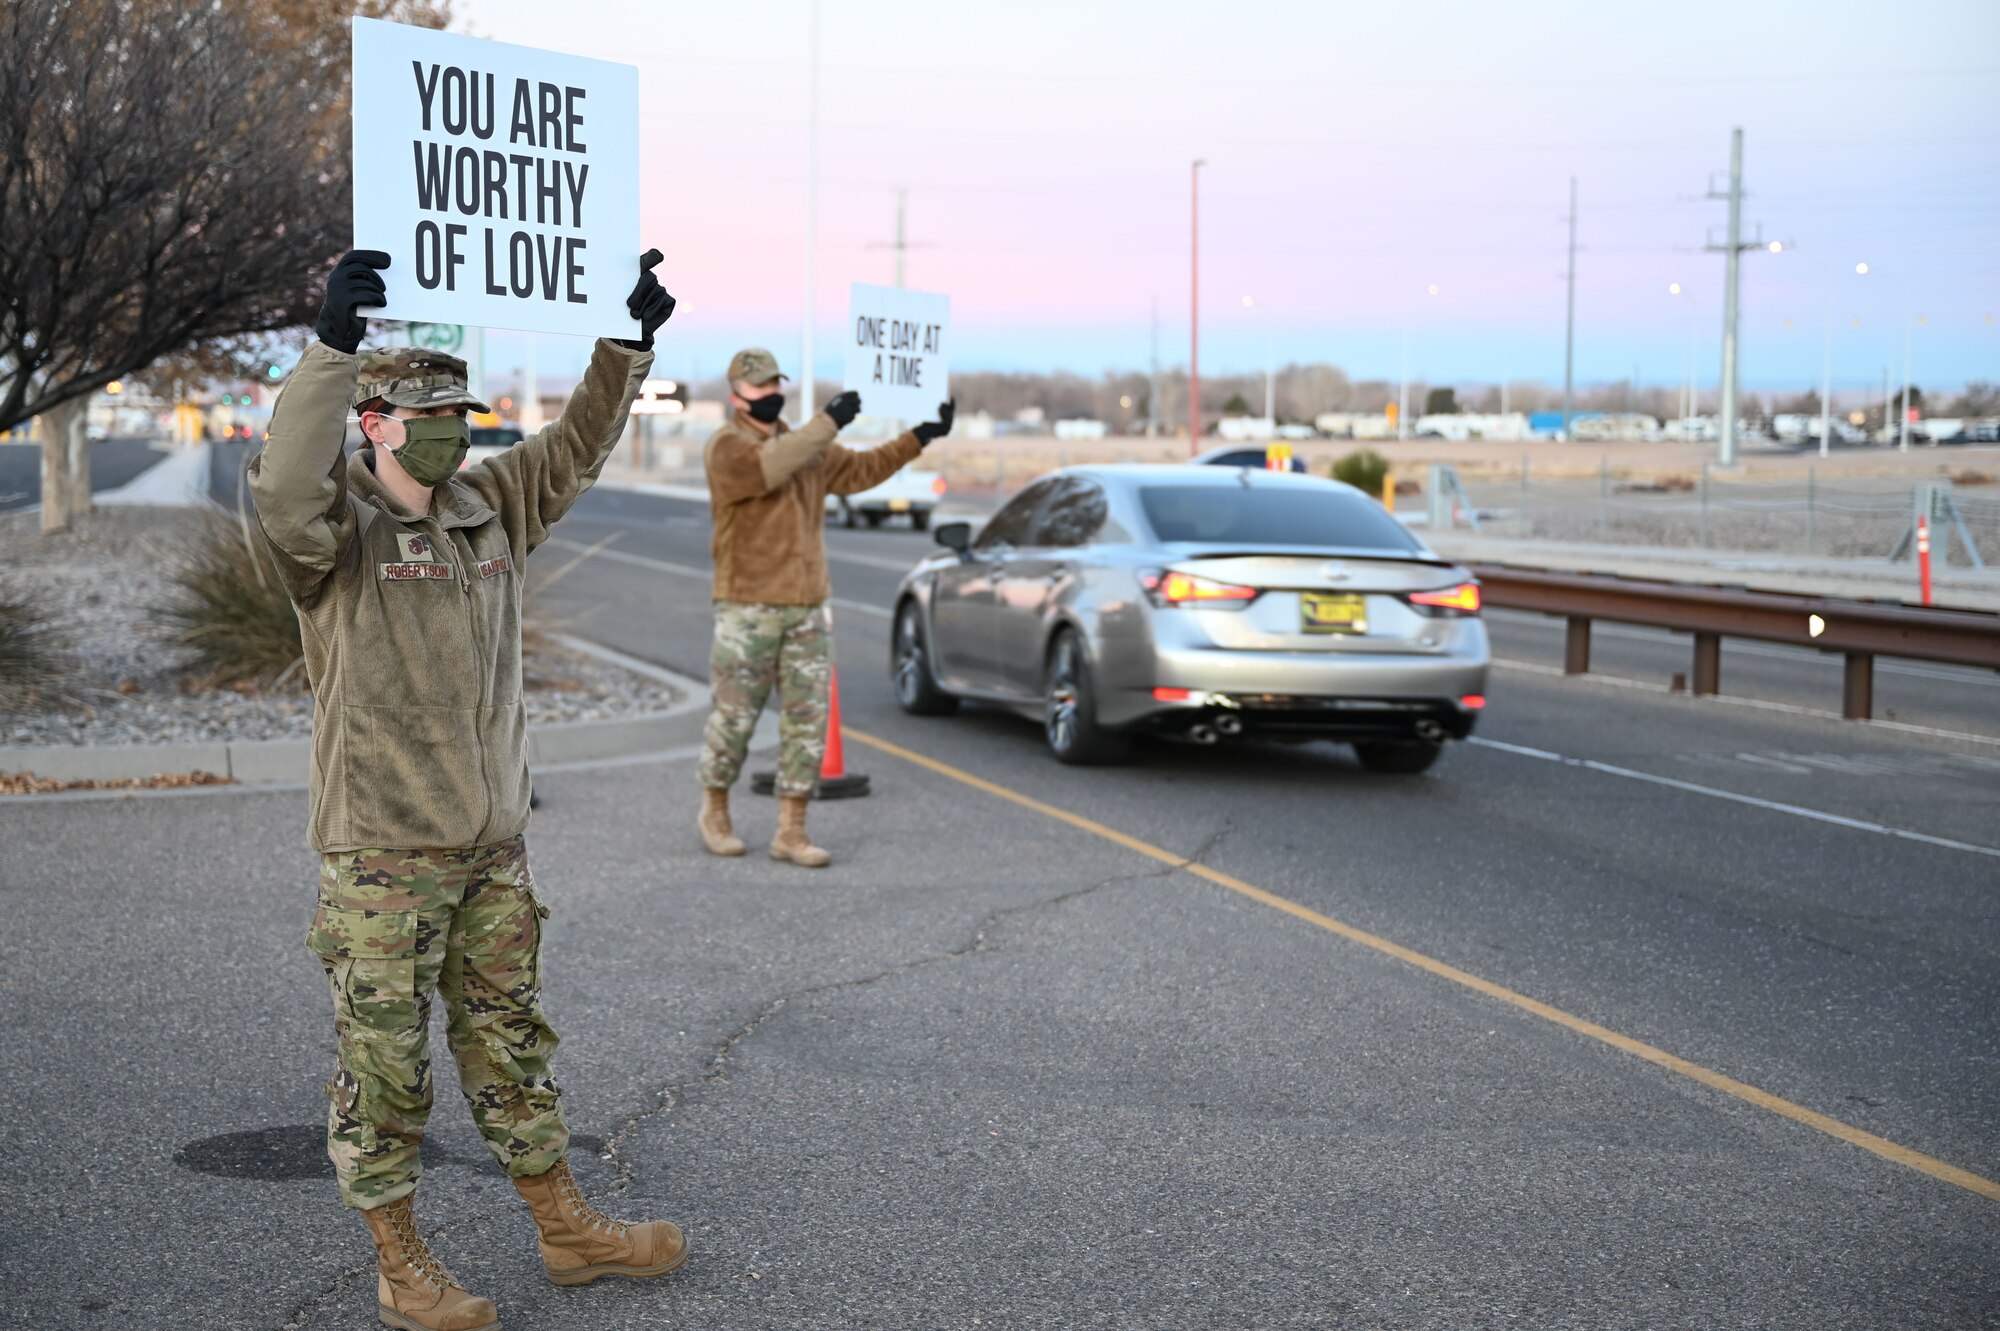 Two servicemembers hold up signs with positive sayings at an installation gate.